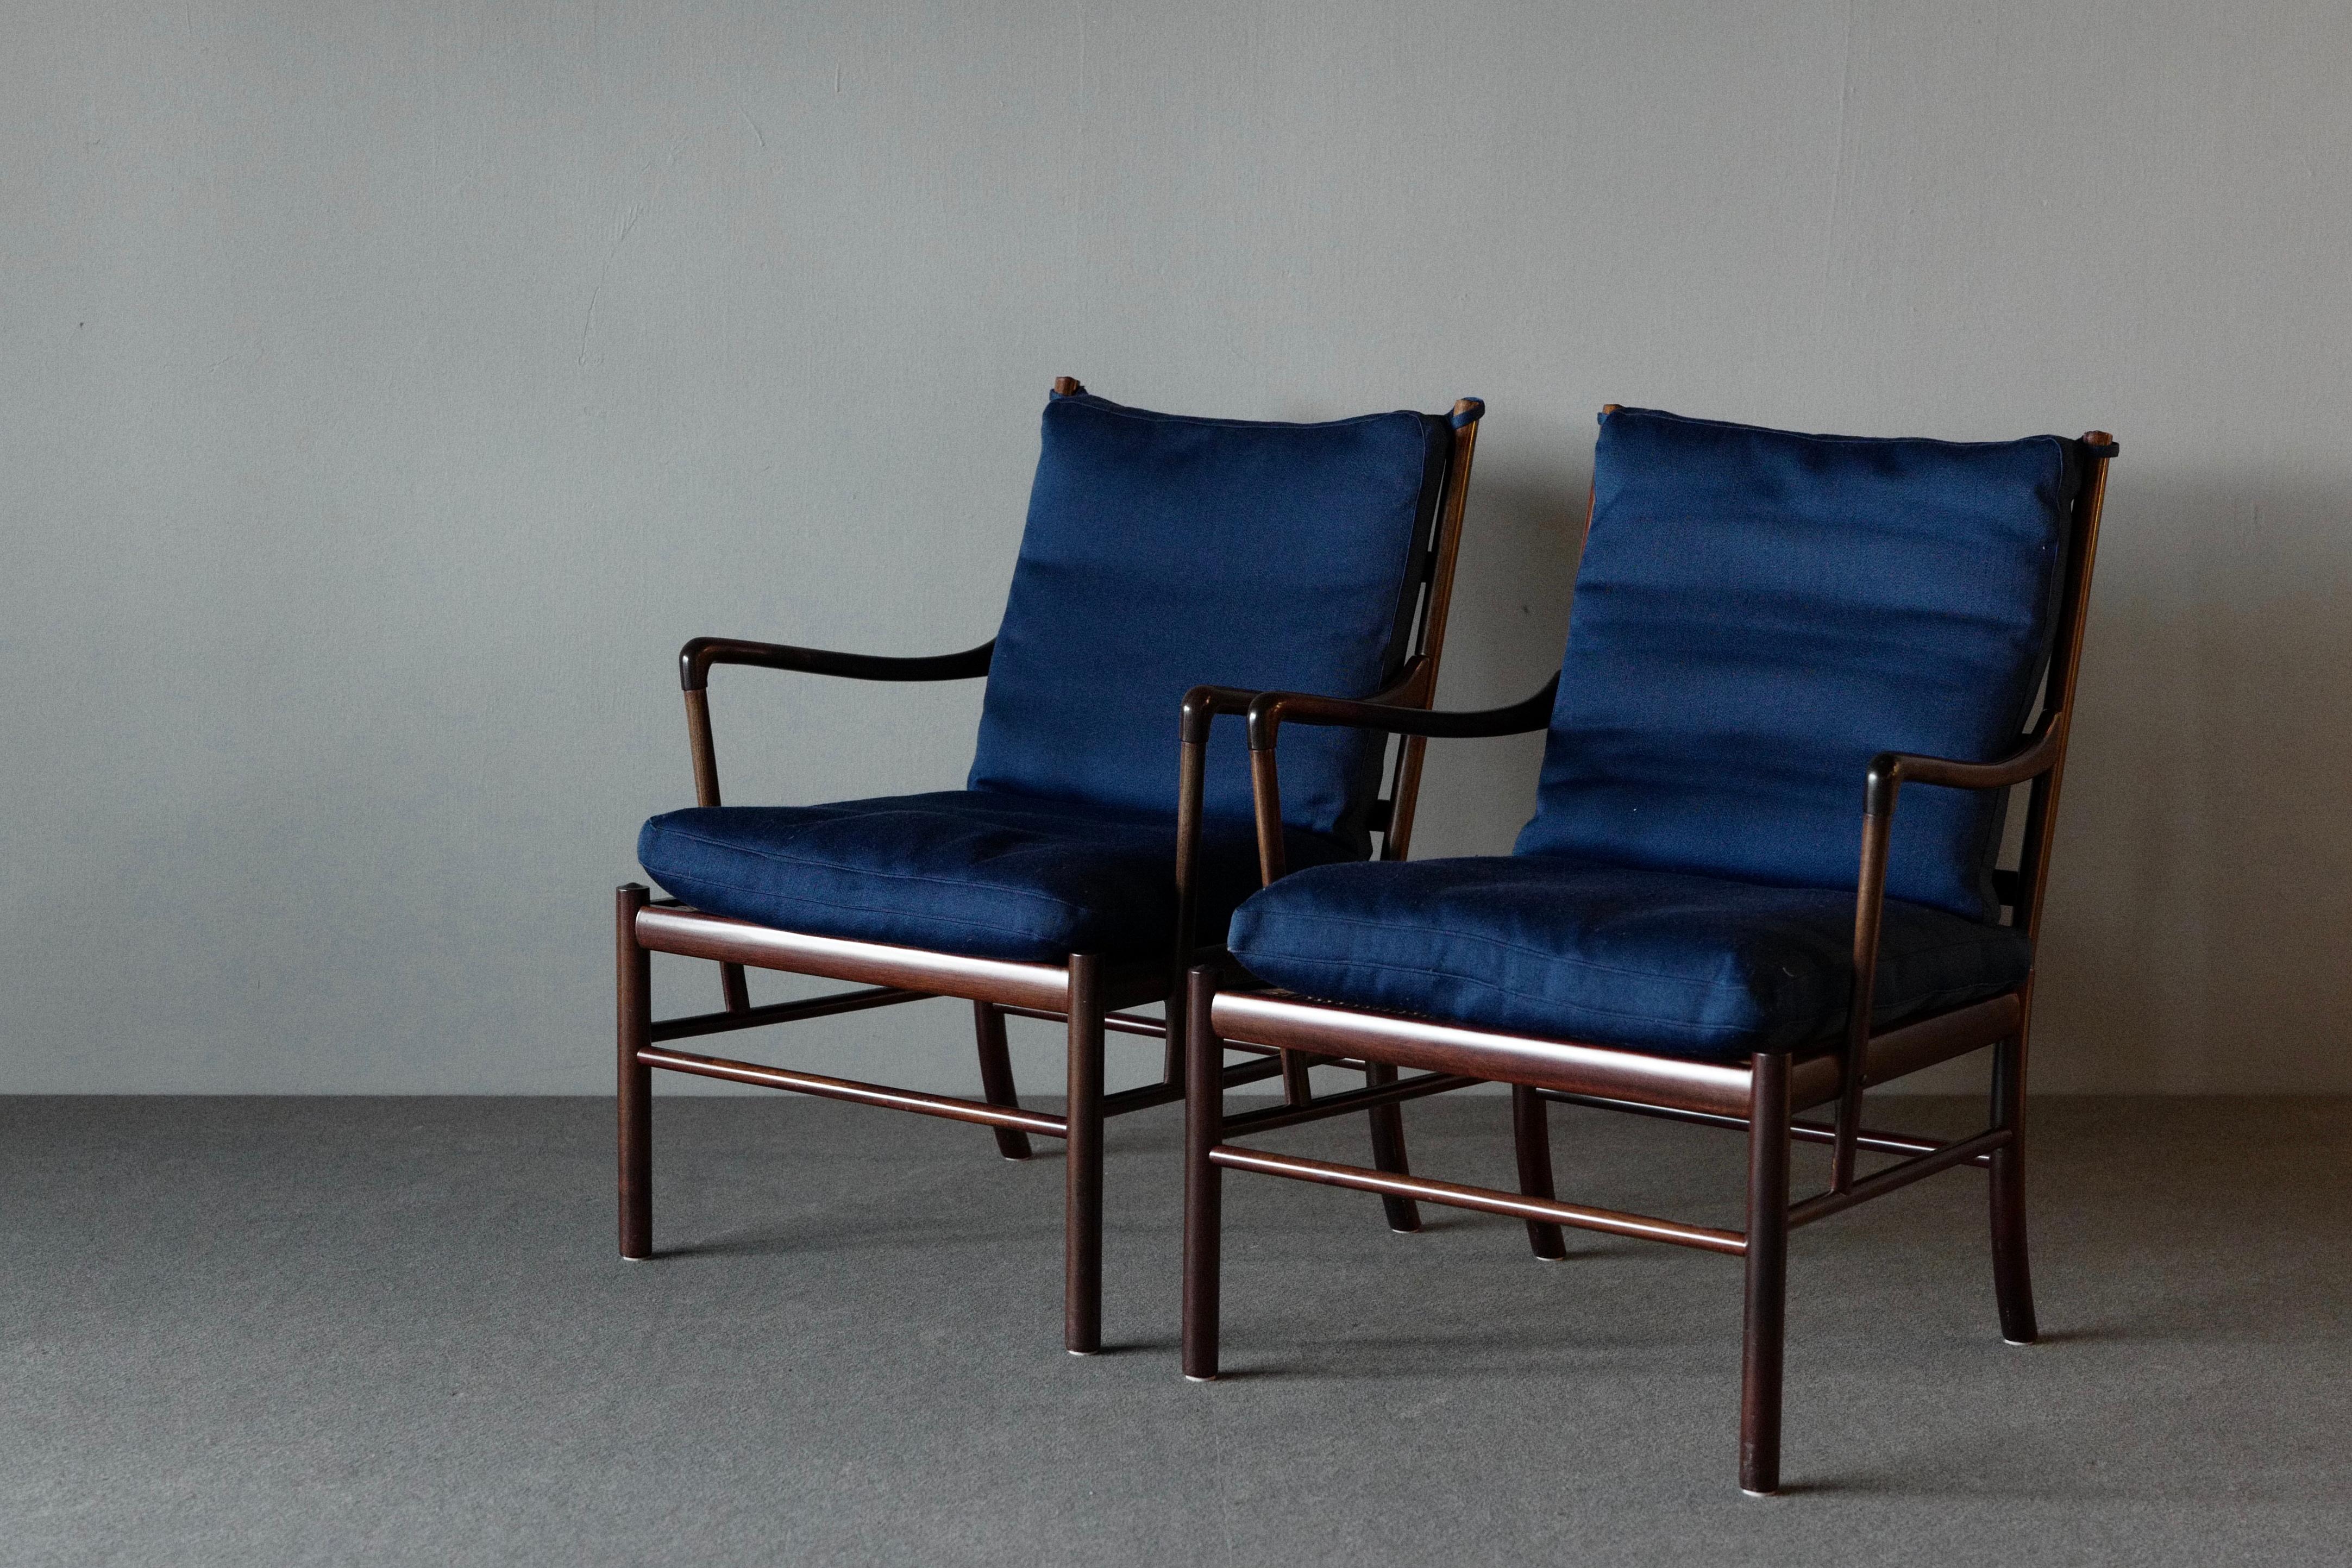 A stunning matching pair of “Colonial” armchairs by Ole Wanscher for P Jepperson. They have a mahogany frame and a woven rattan cane seat. The cushions on the seat and back are upholstered in blue wool. These chairs are elegant and refined in